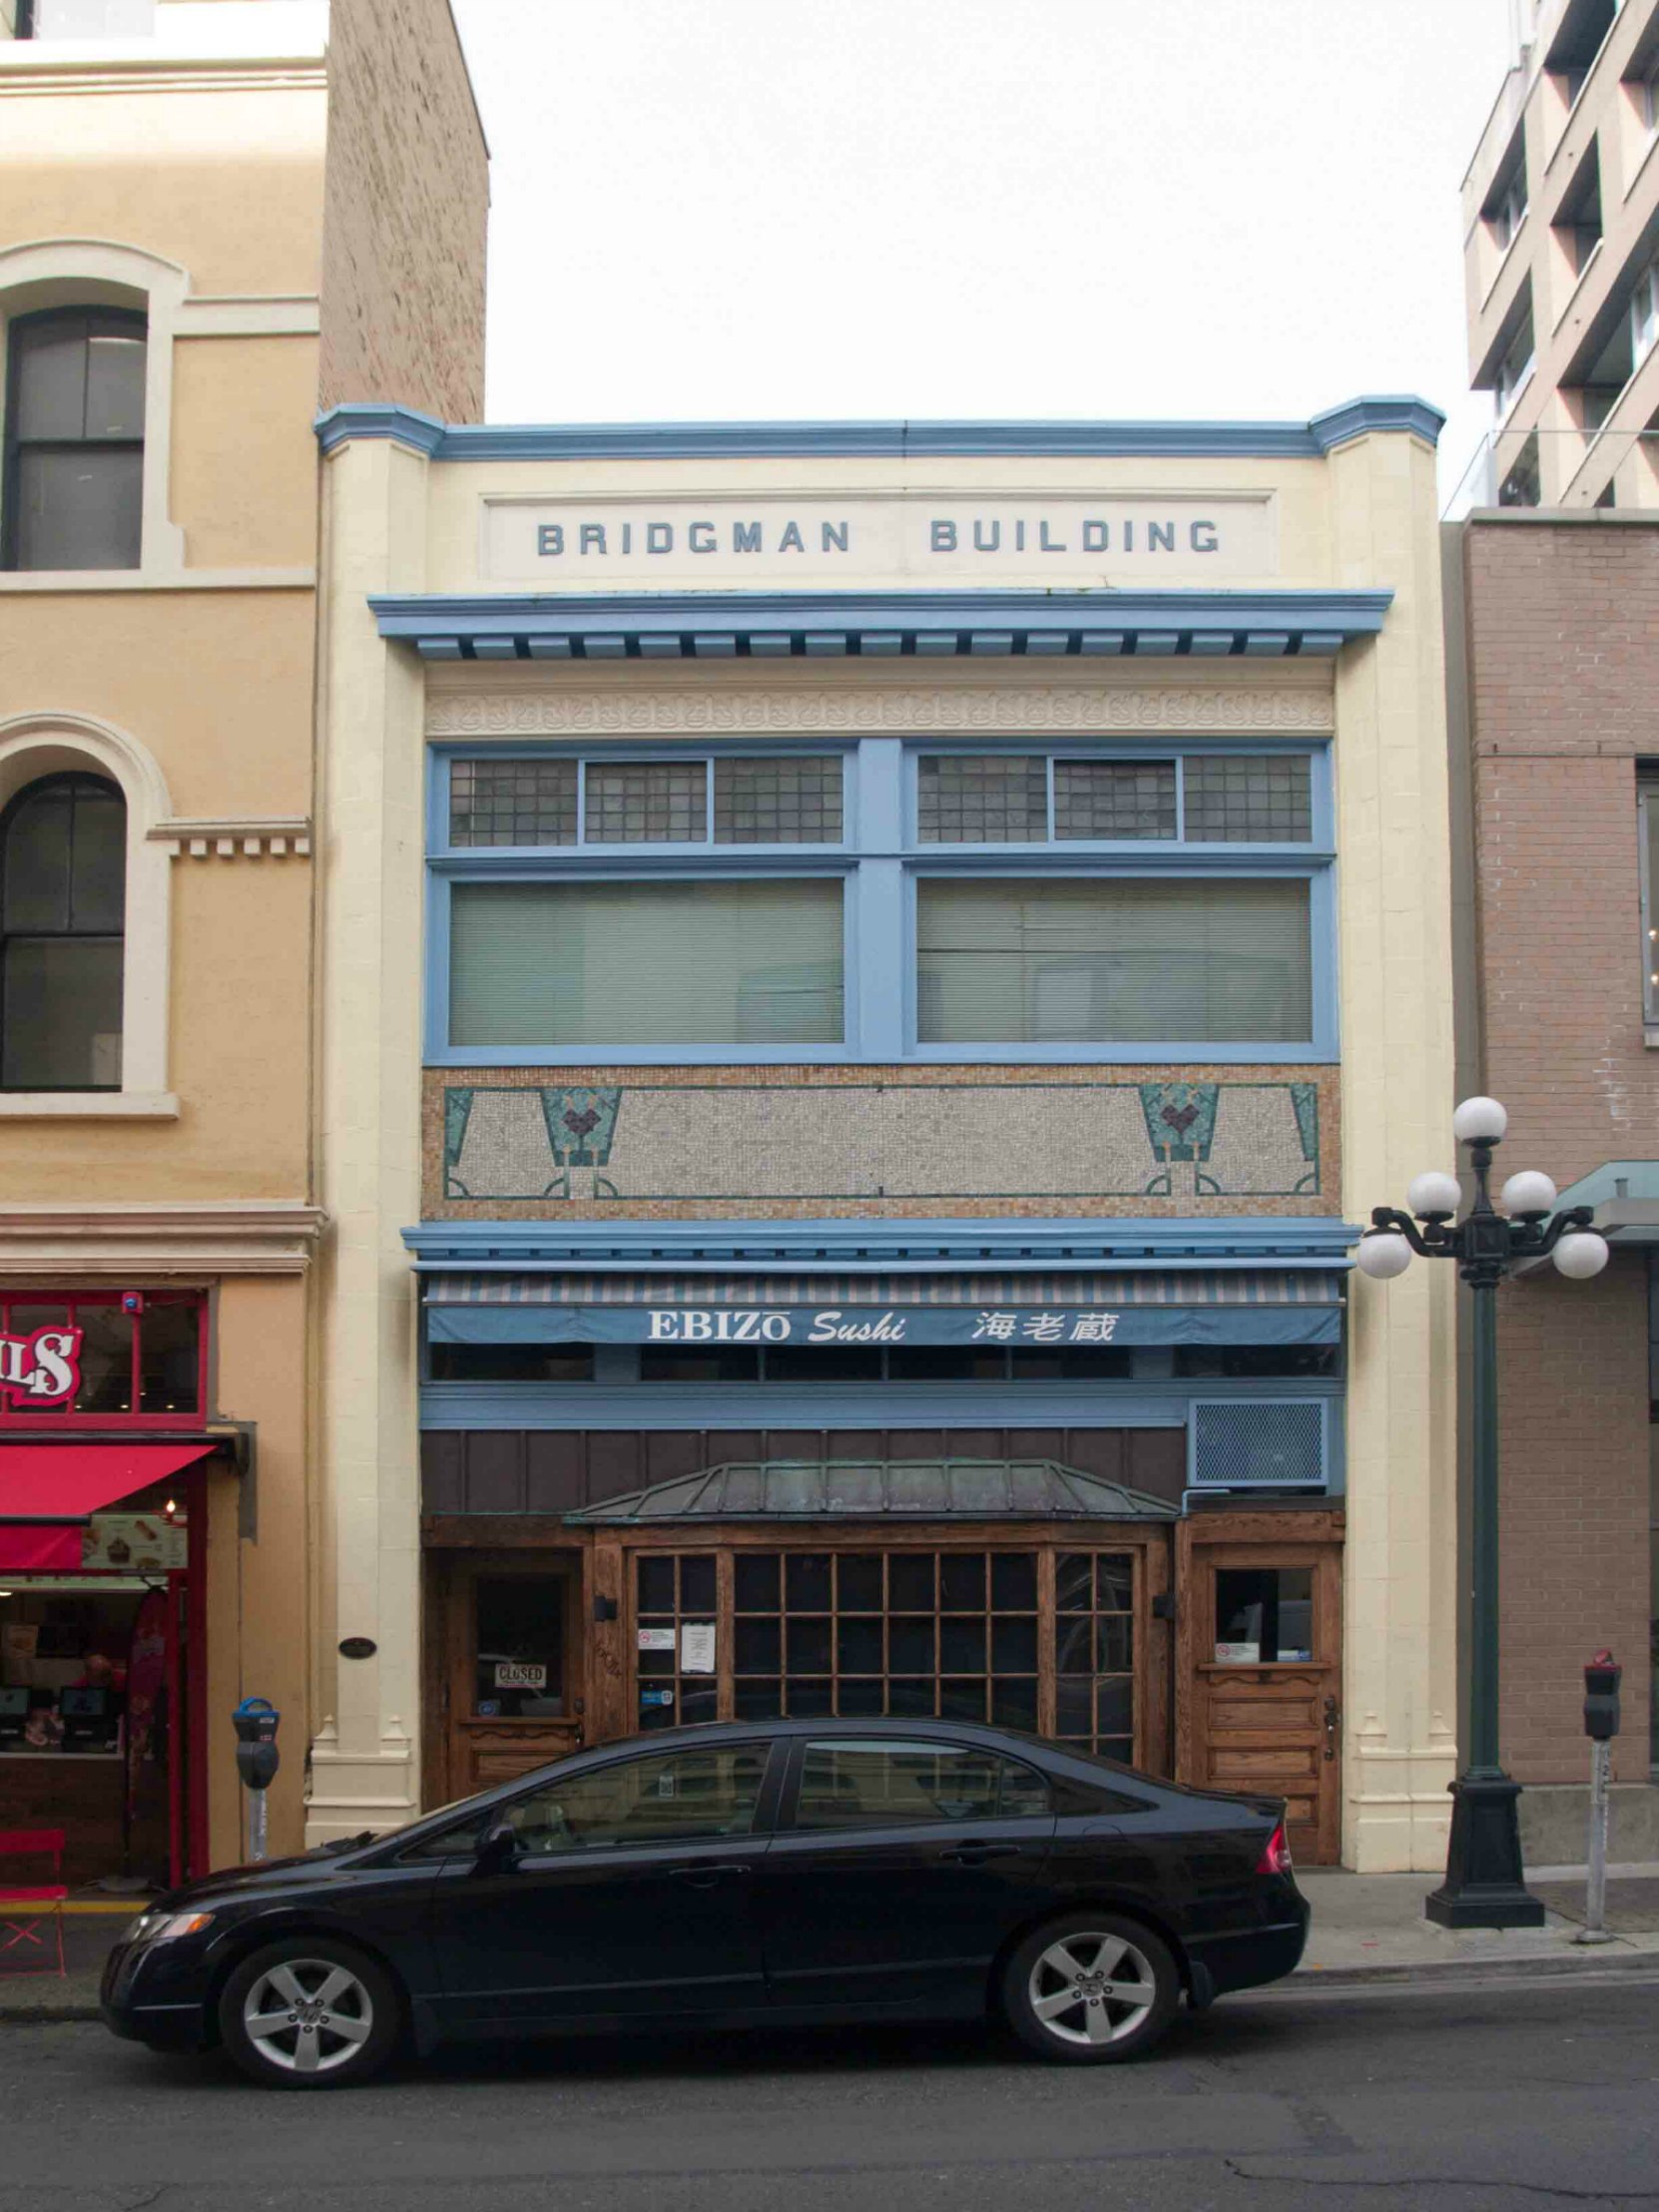 The Bridgman Building at 604 Broughton Street was built in 1885 but its current facade was added in 1910 by architects Percy L. James and Douglas James.